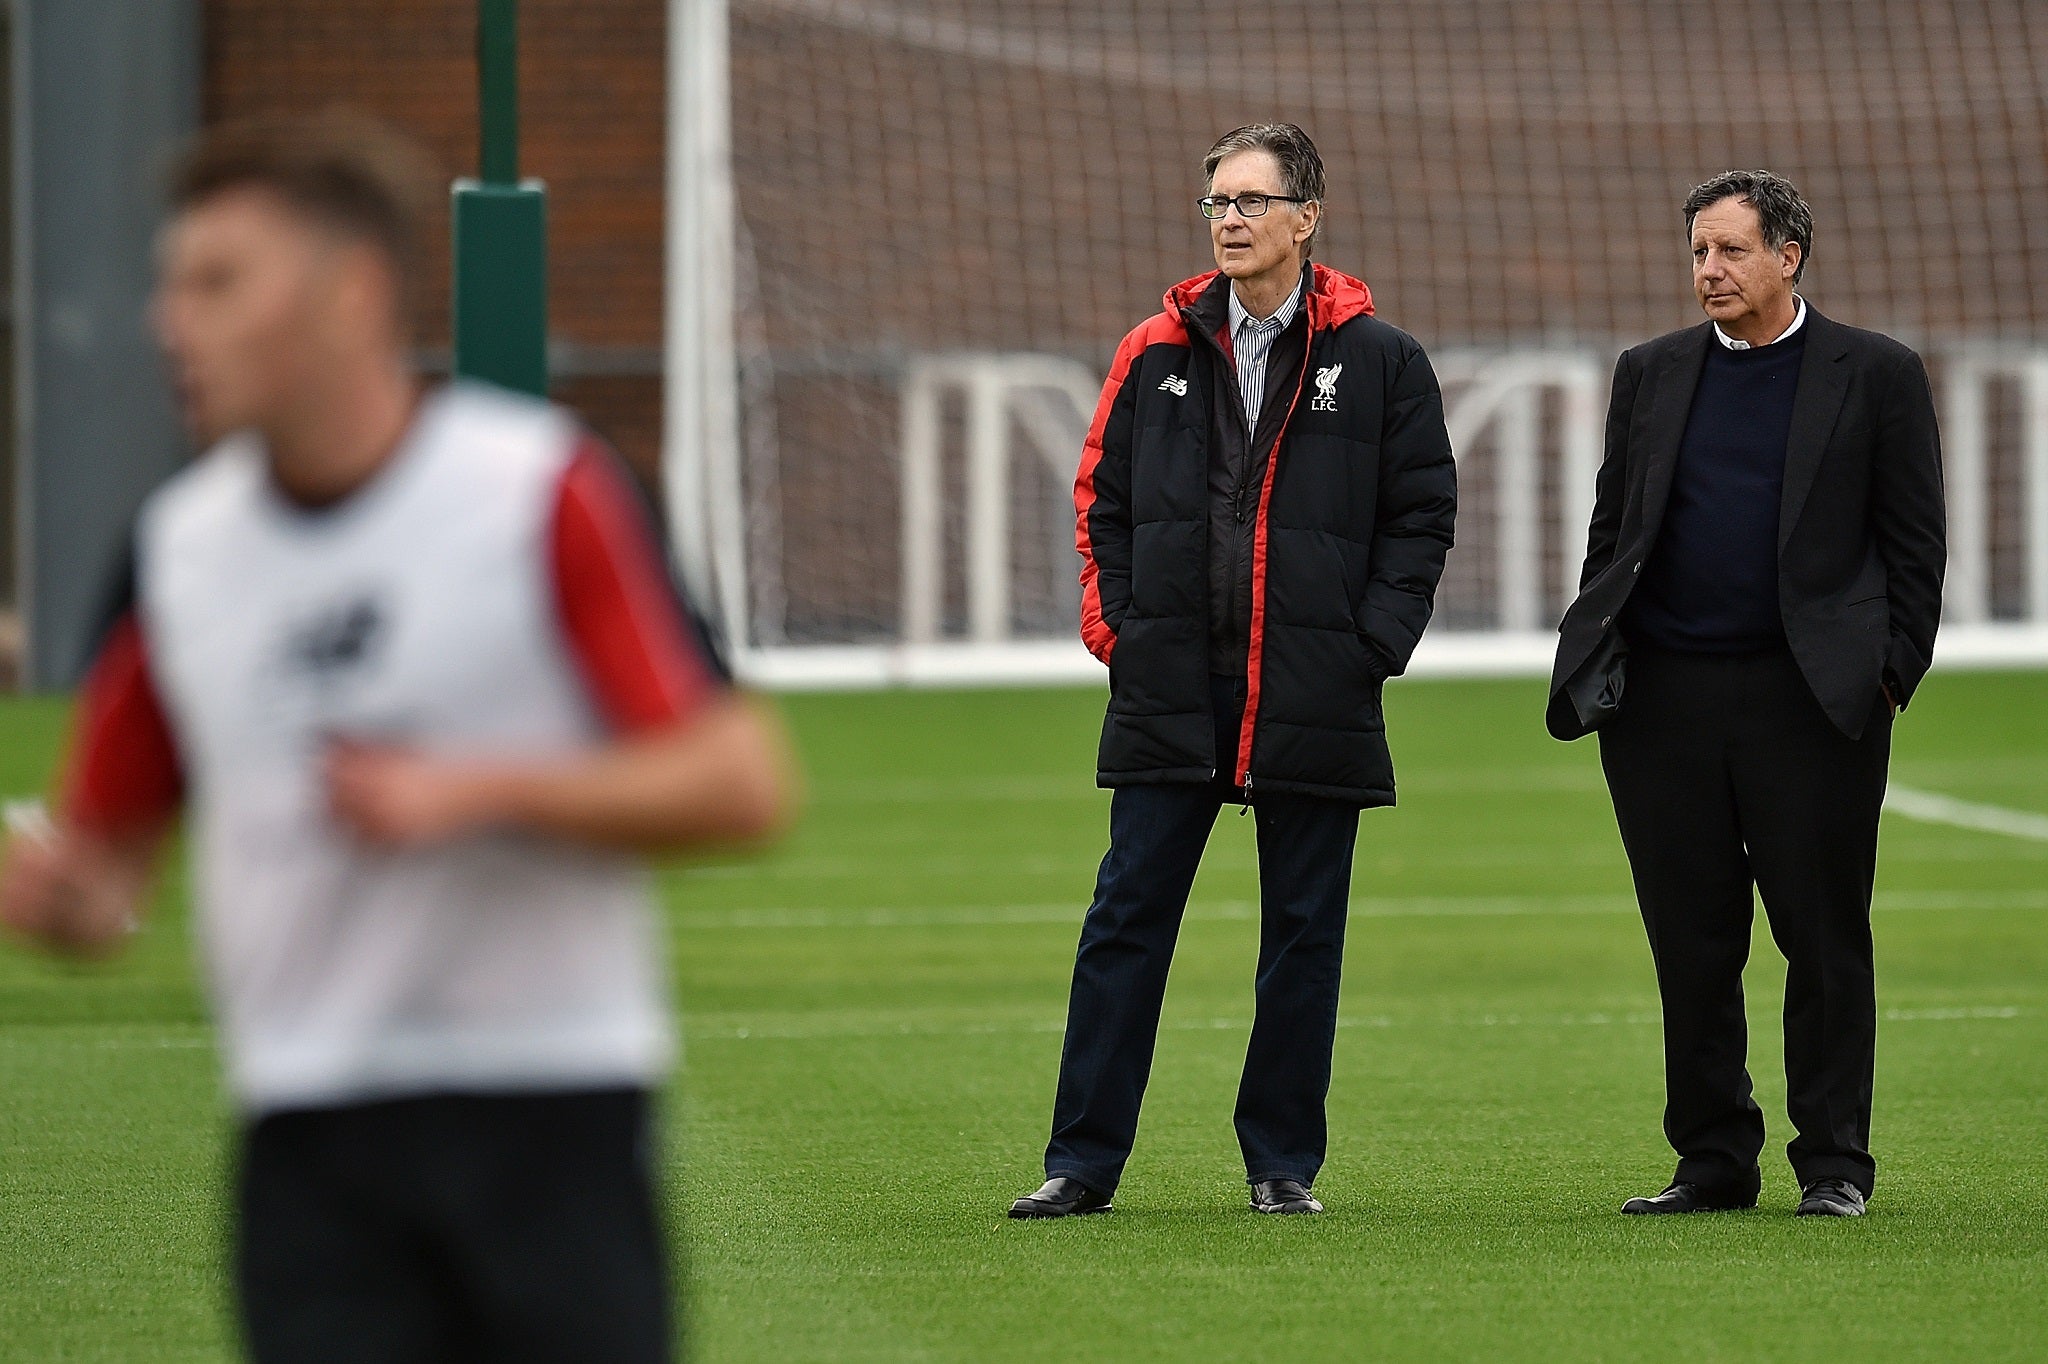 Liverpool part owners John W Henry and Tom Werner watch a training session at Melwood